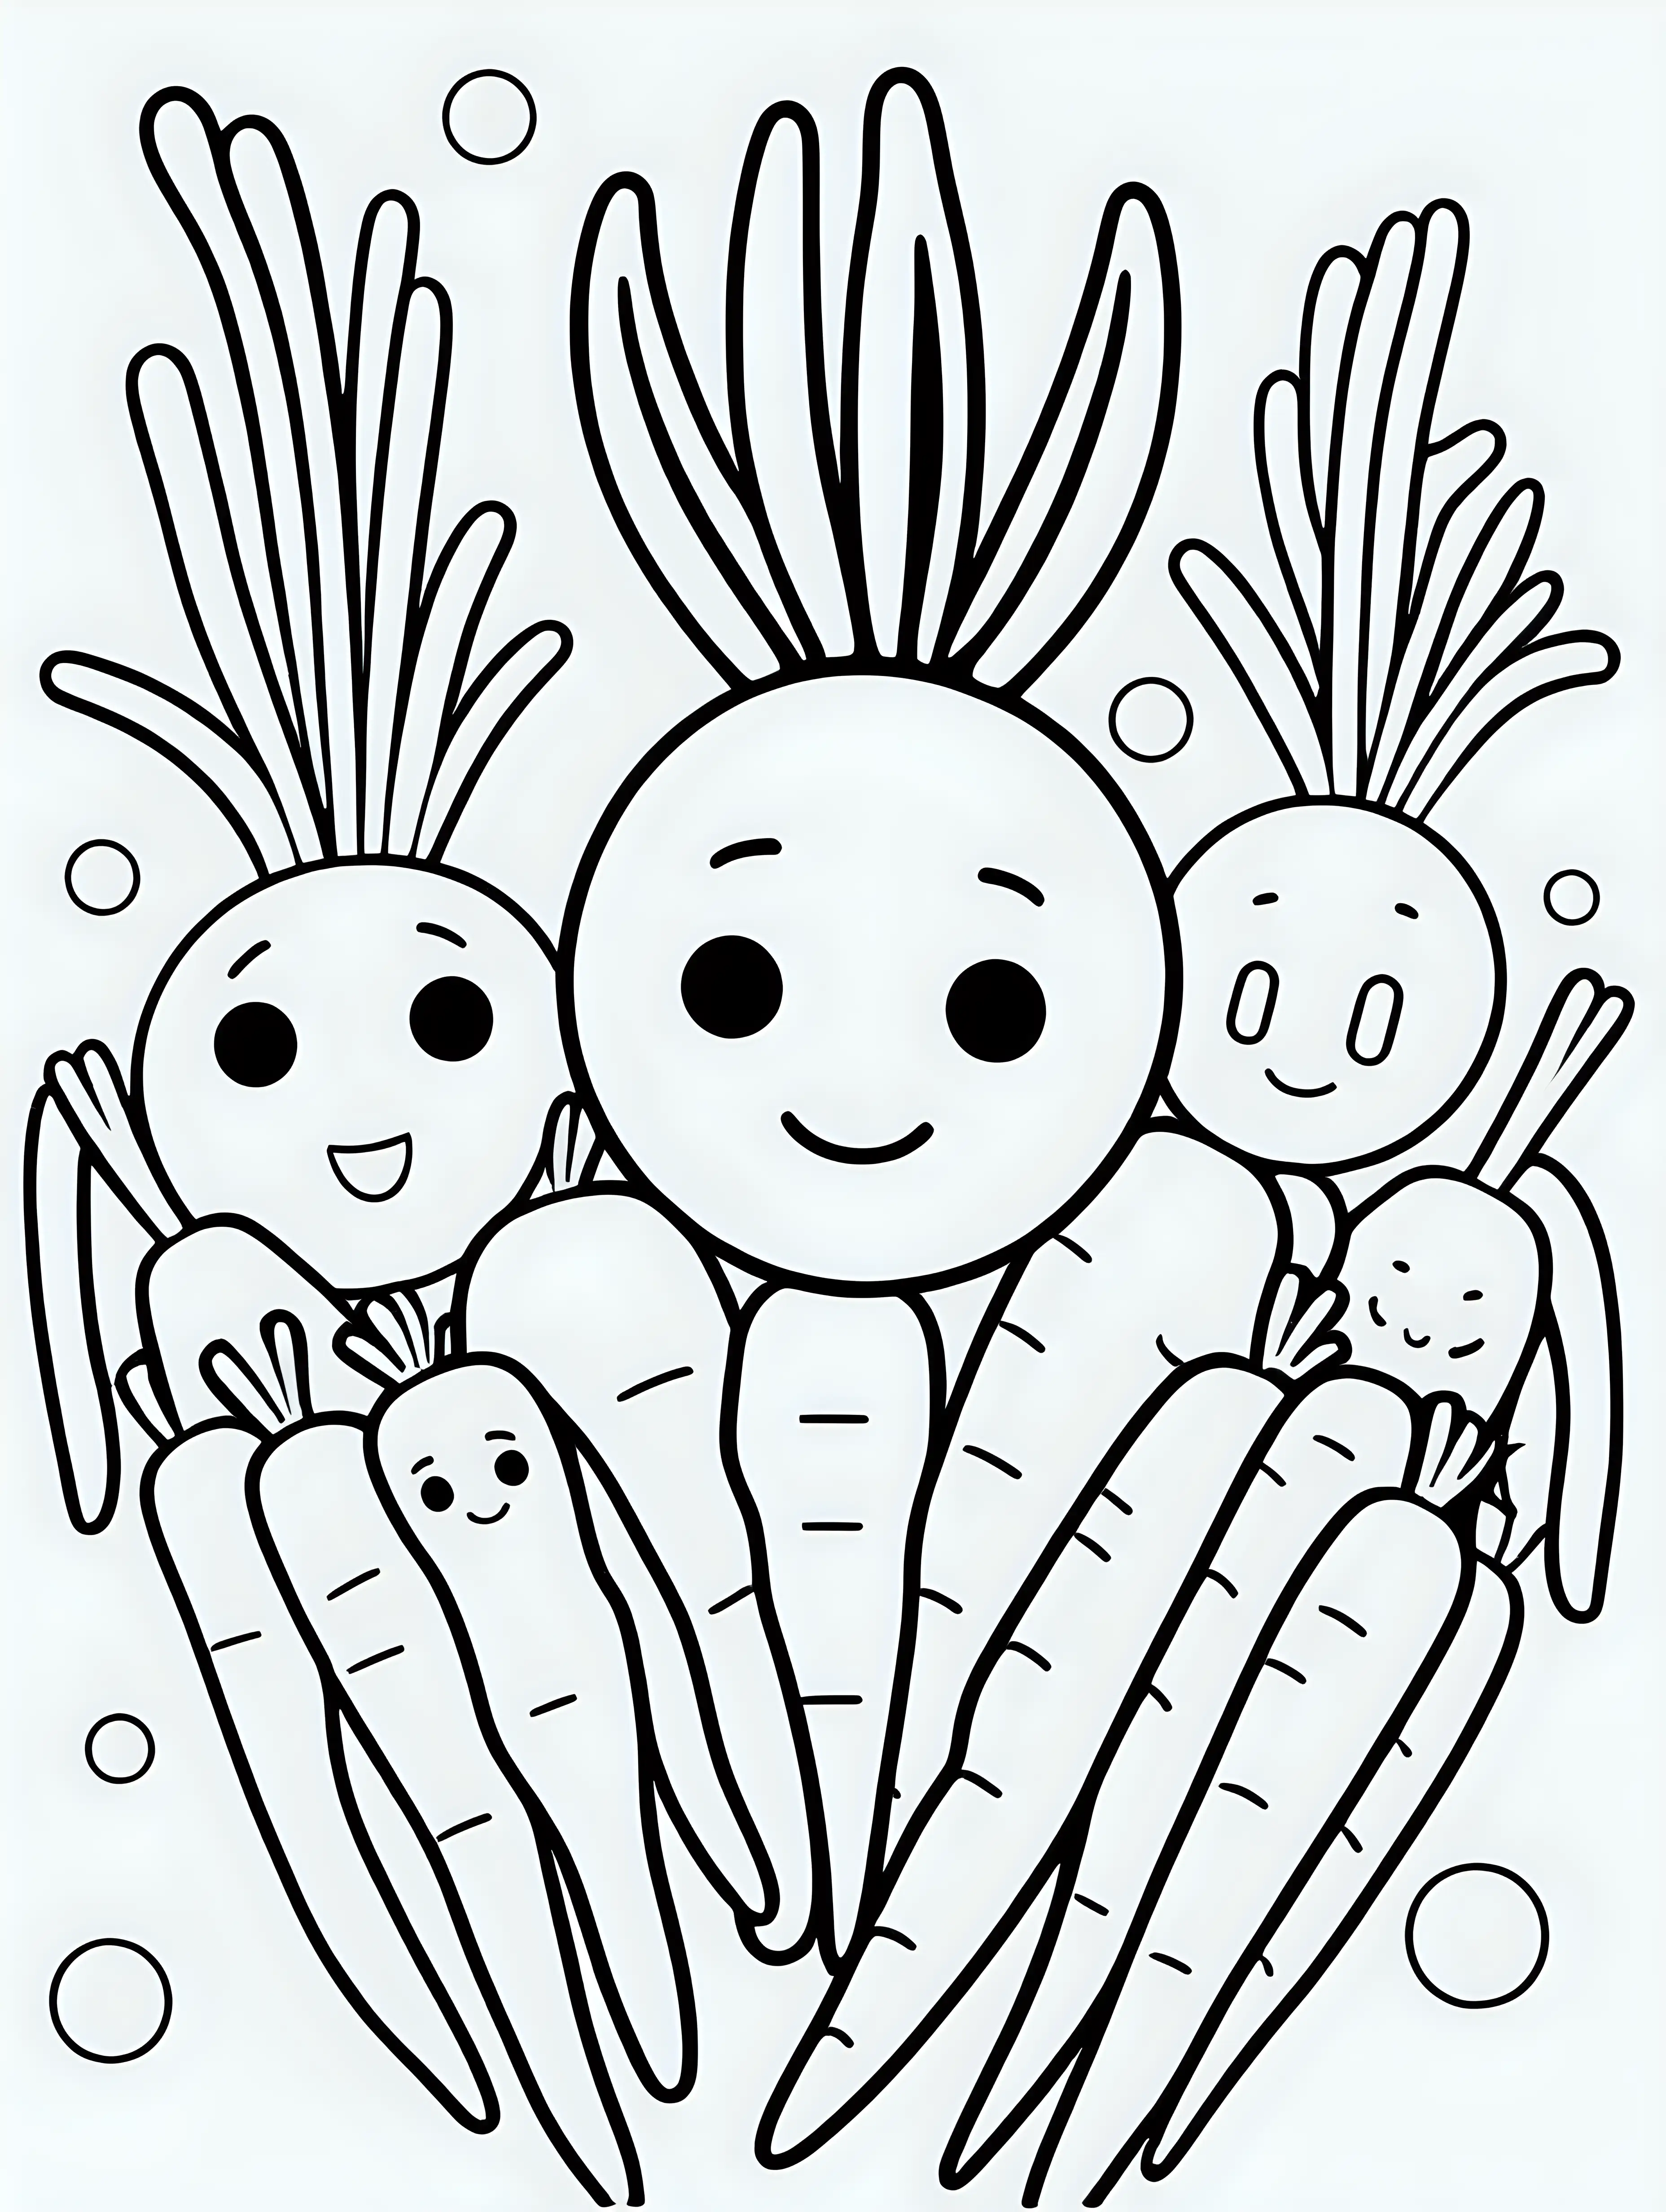 Adorable Cartoon Carrots in Clean Black and White Coloring Book Illustration